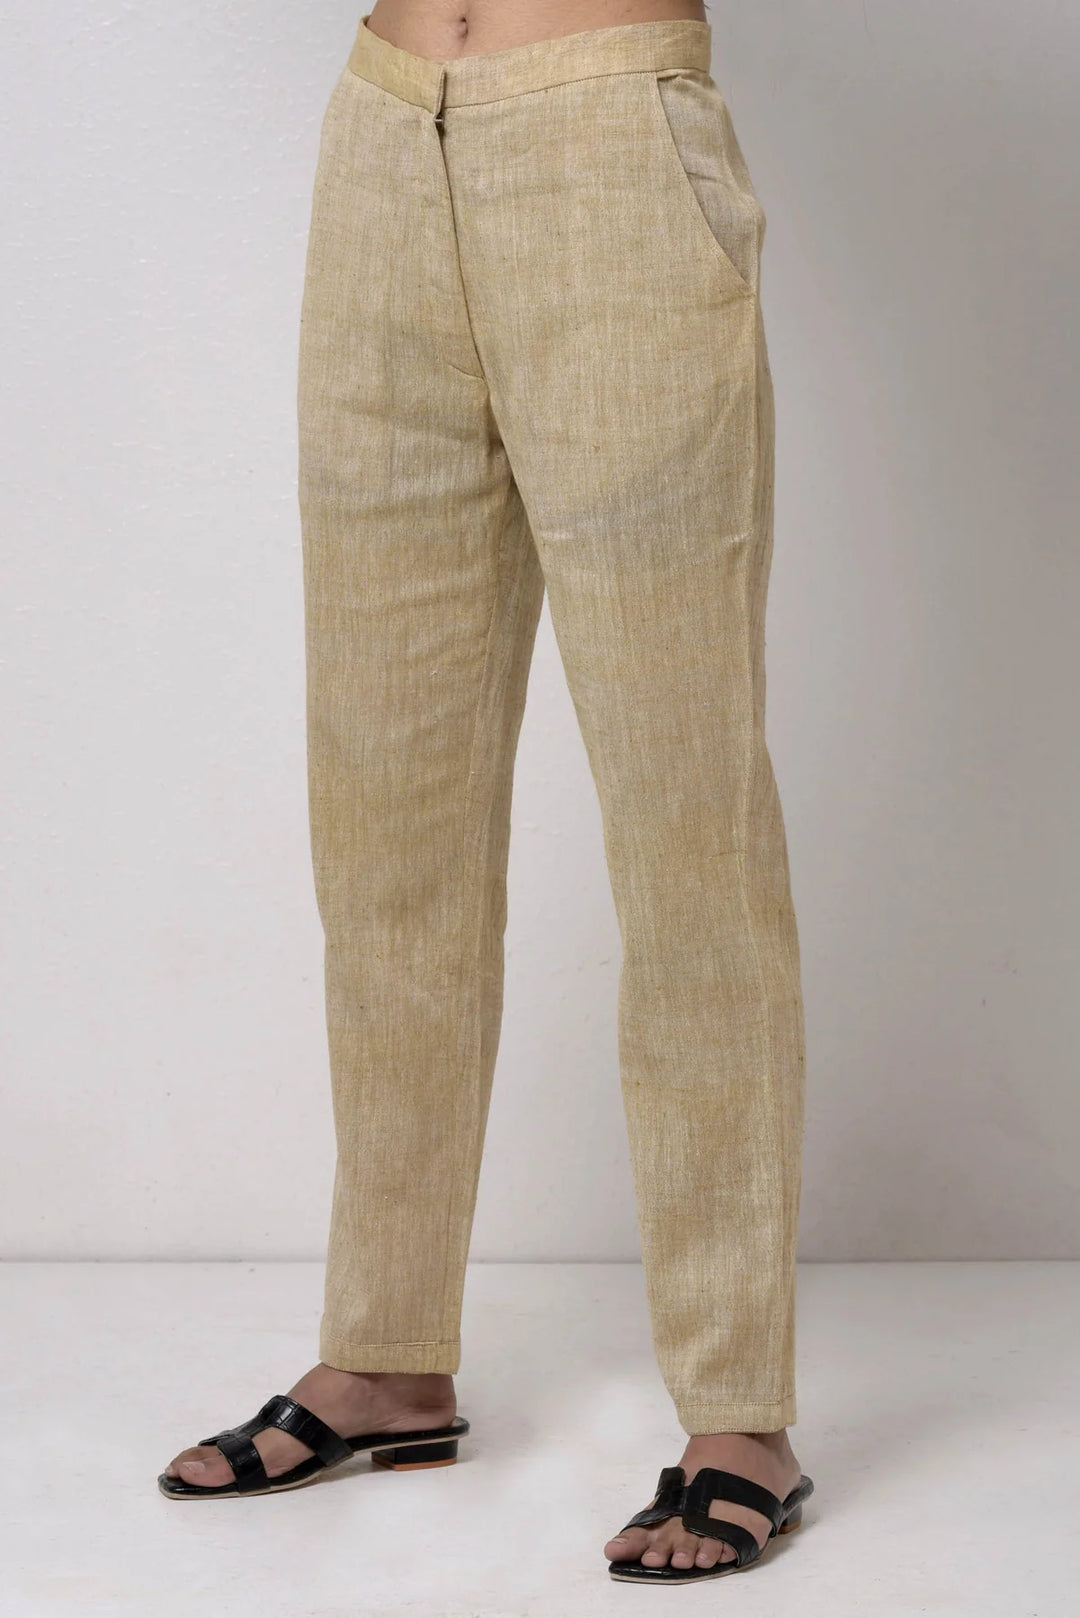 Beige Cotton Trousers with Insert Pockets | Ayana Handwoven Trousers - Beige